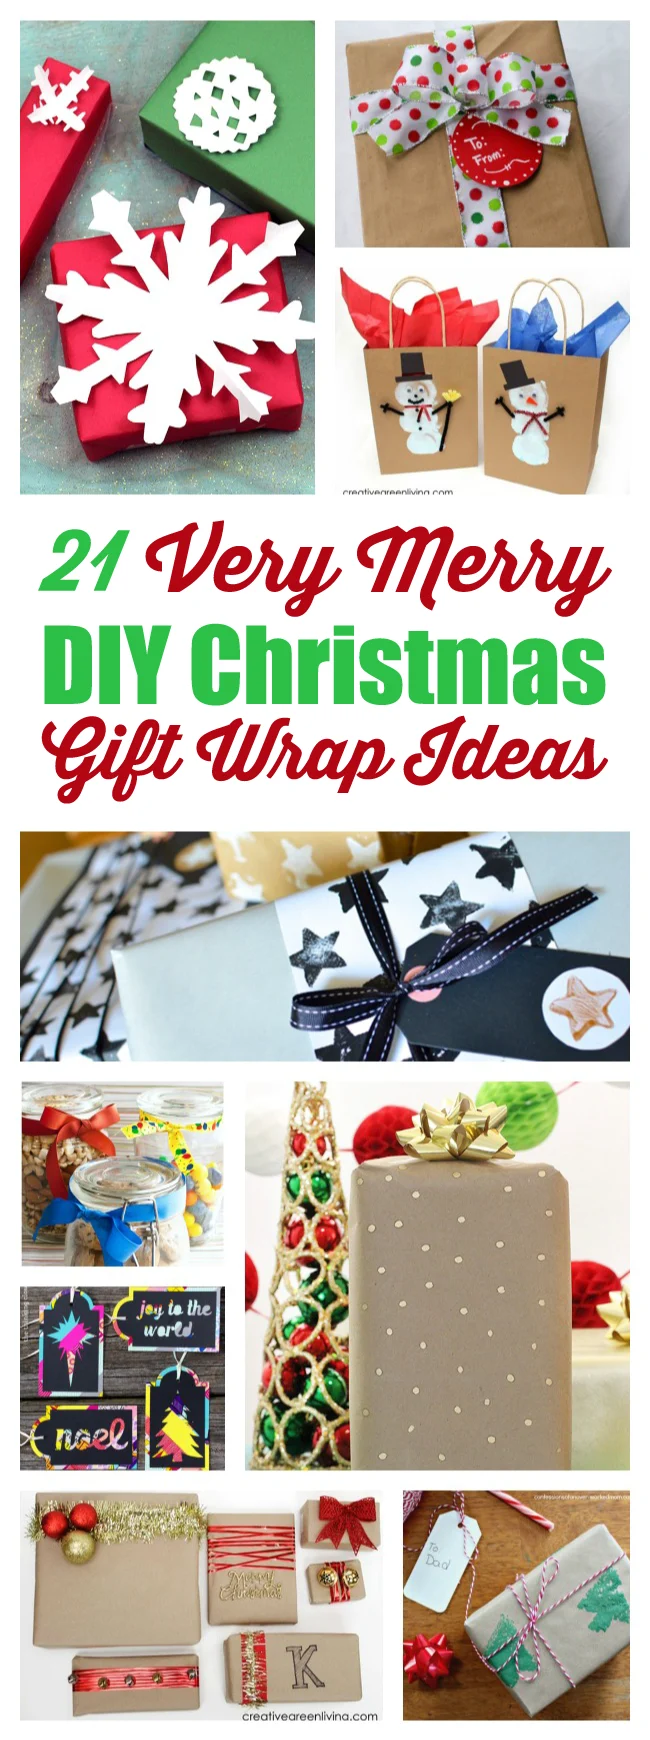 Love the idea of making my own wrapping paper, makes gifts even more thoughtful. It's so much easier than it sounds too. Bonus!